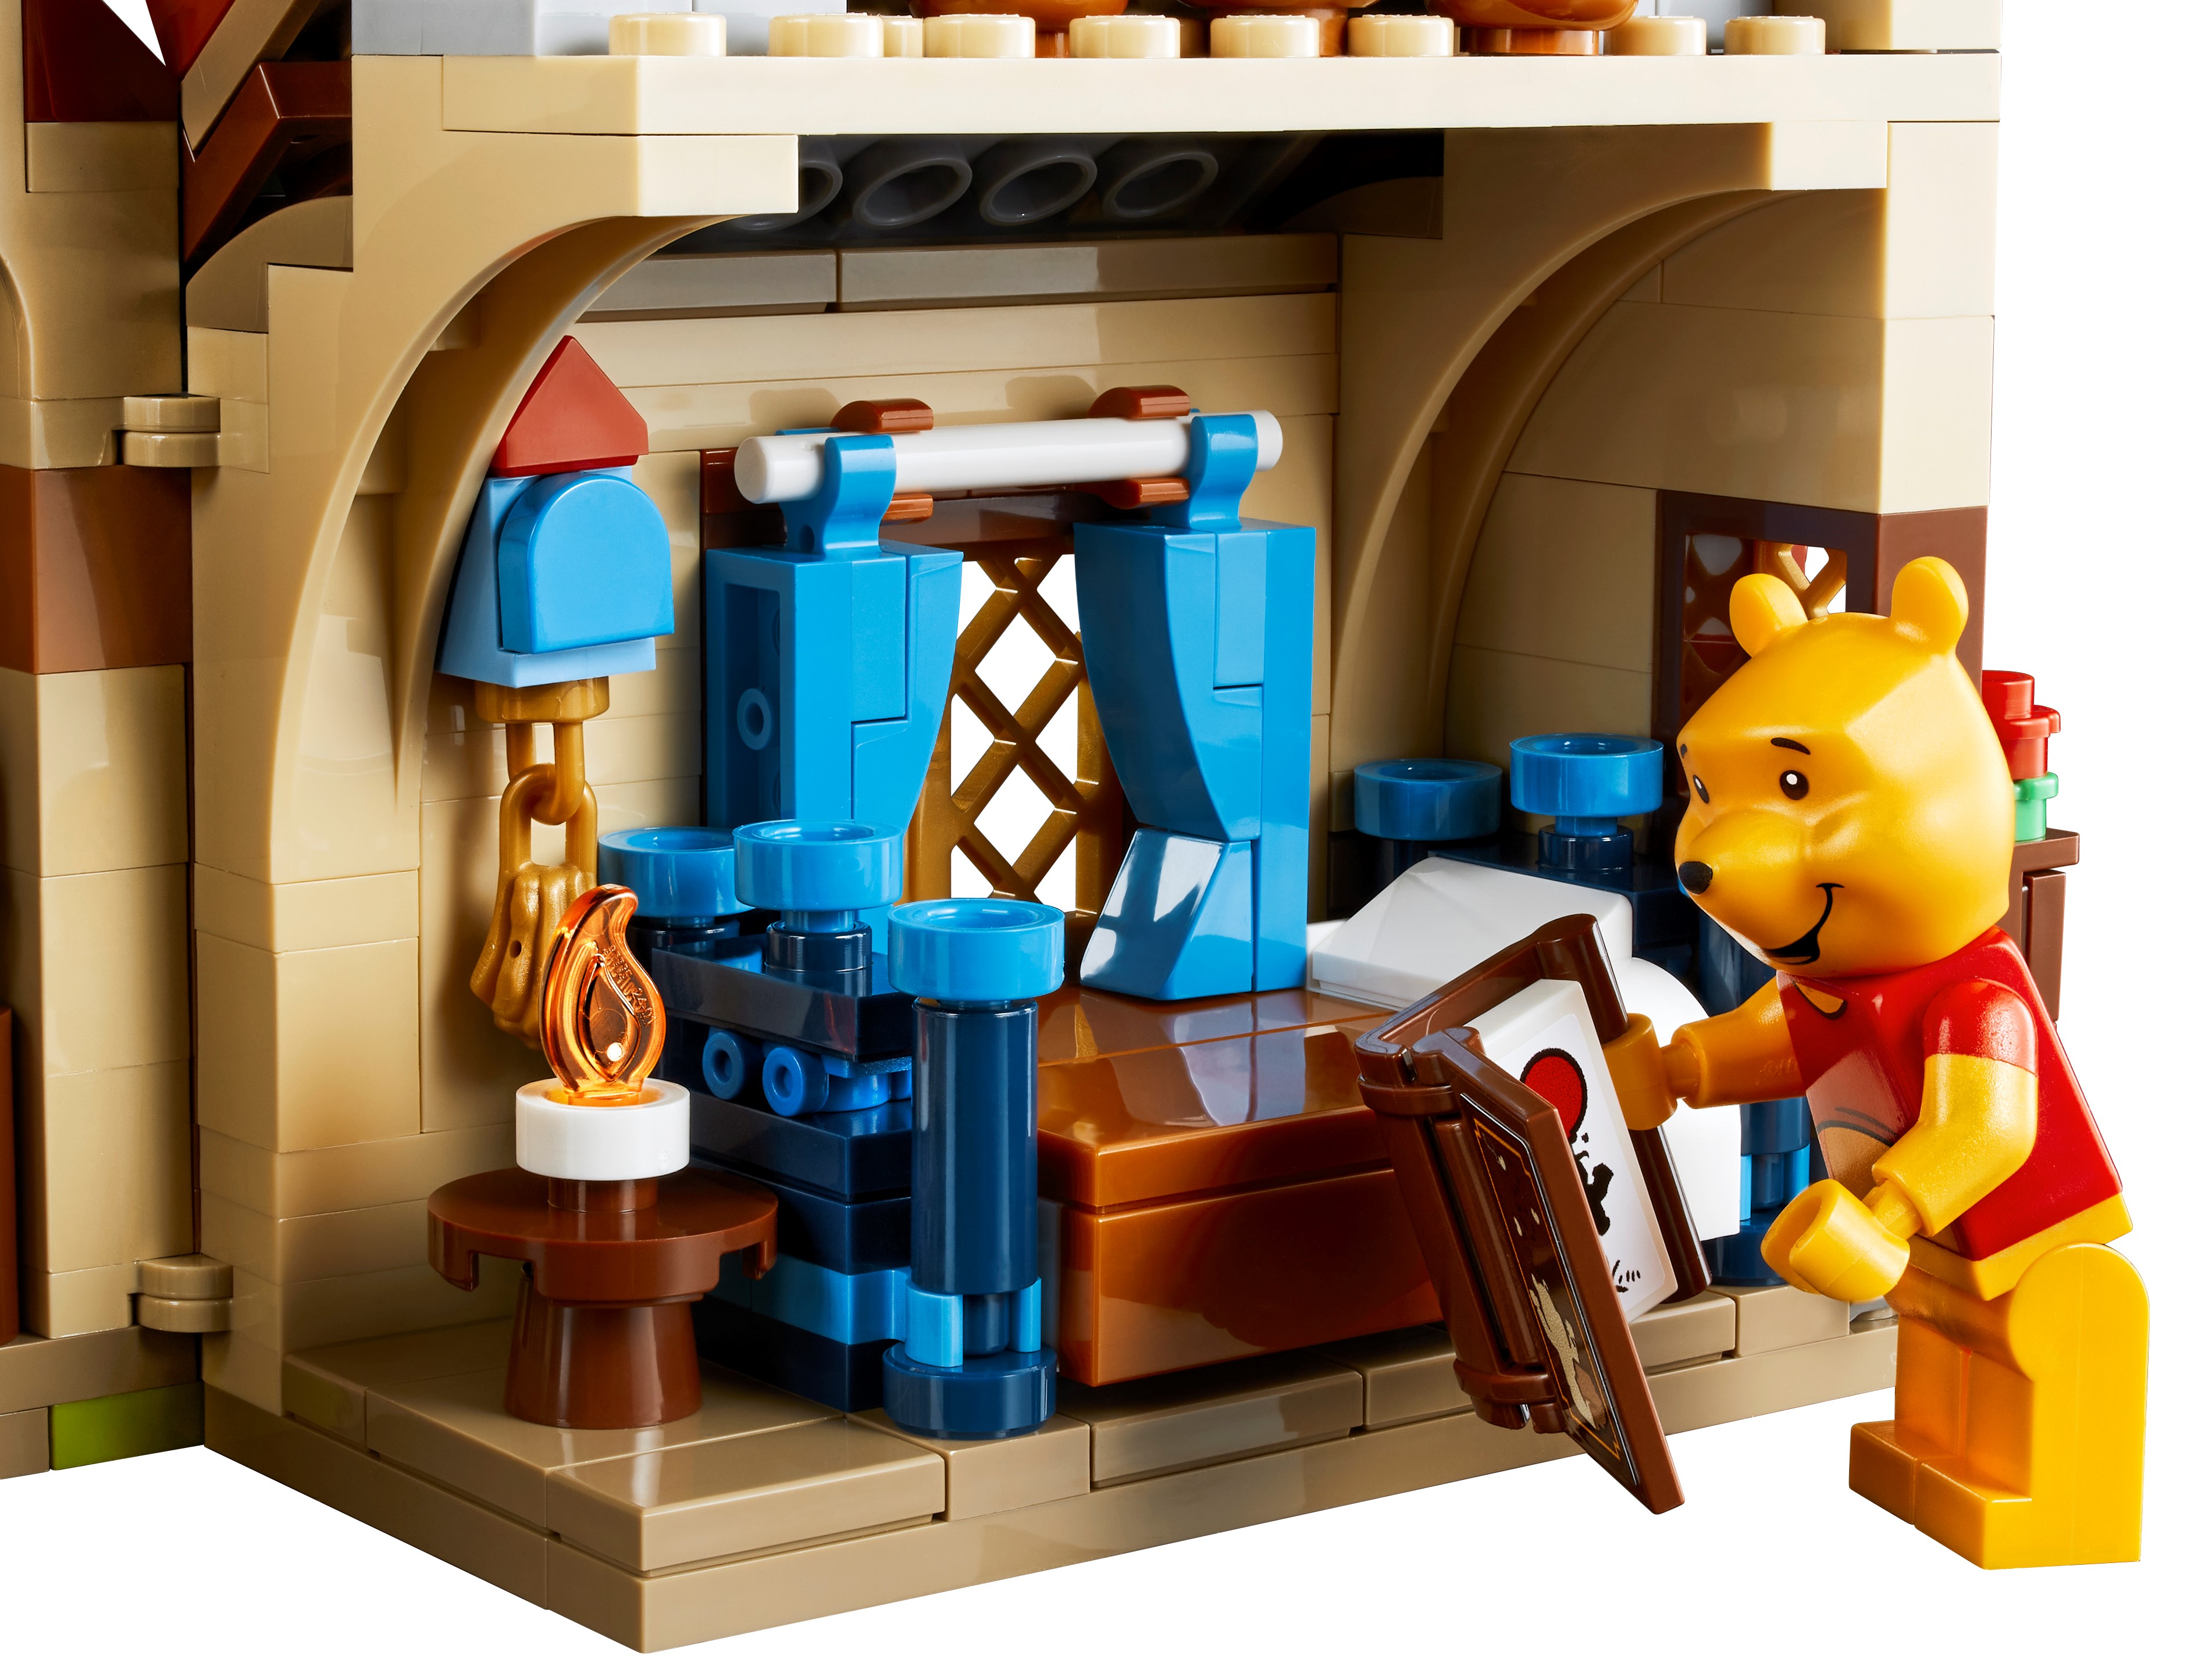 Led Light Kit for Lego Winnie the Pooh 21326 Classic Version Details about   Brick Shine 